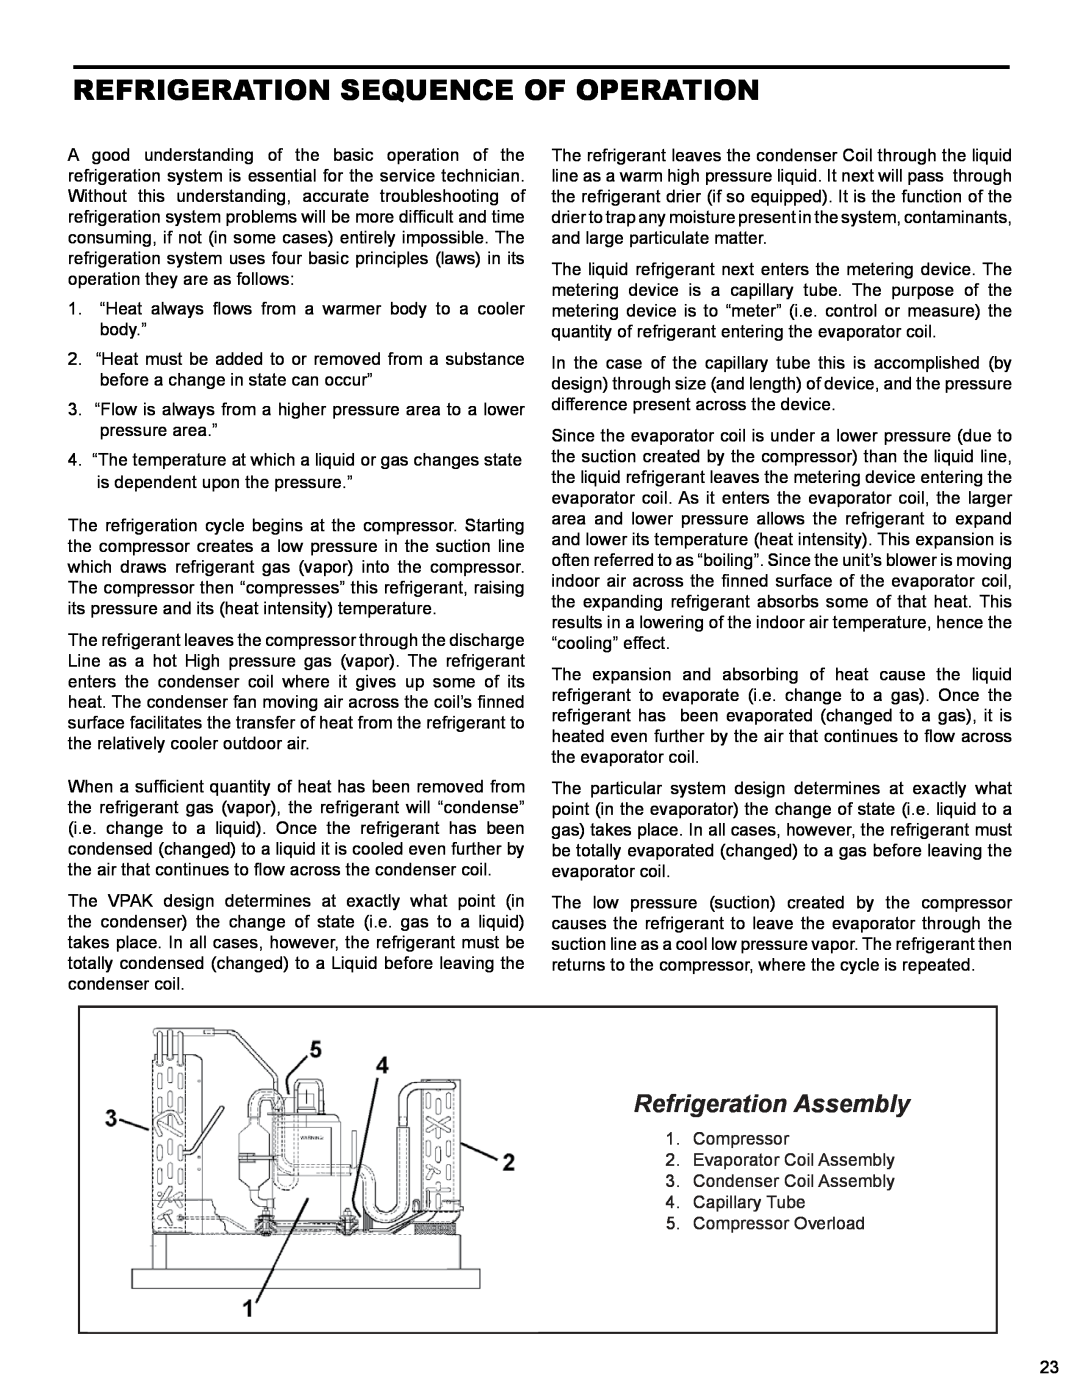 Friedrich R410A manual Refrigeration Sequence Of Operation, Refrigeration Assembly 